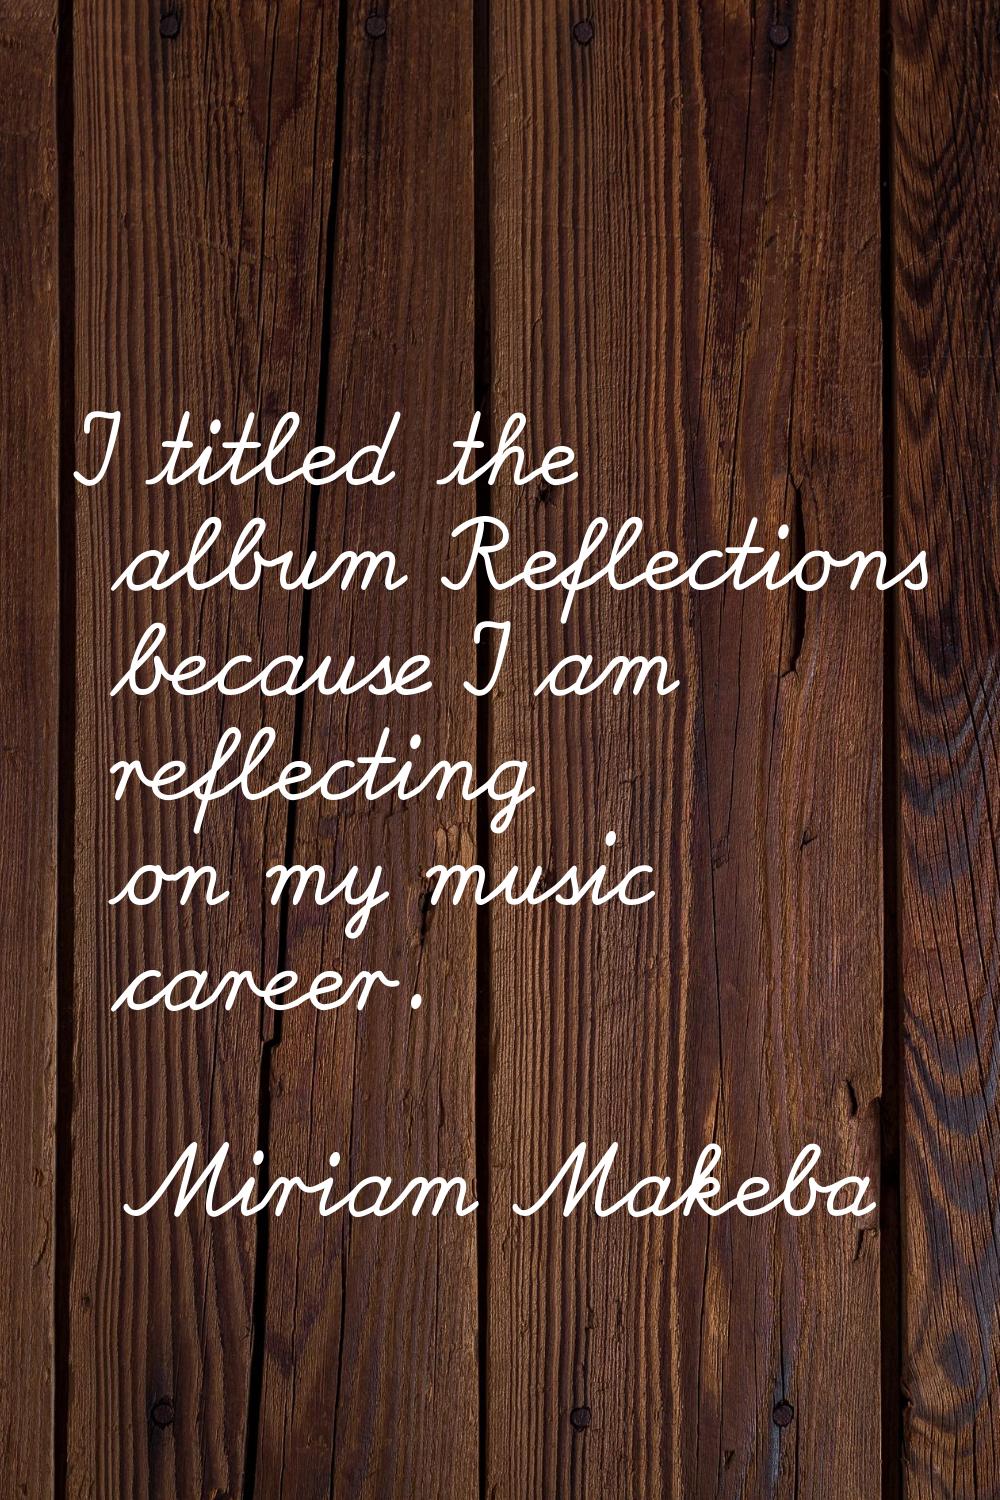 I titled the album Reflections because I am reflecting on my music career.